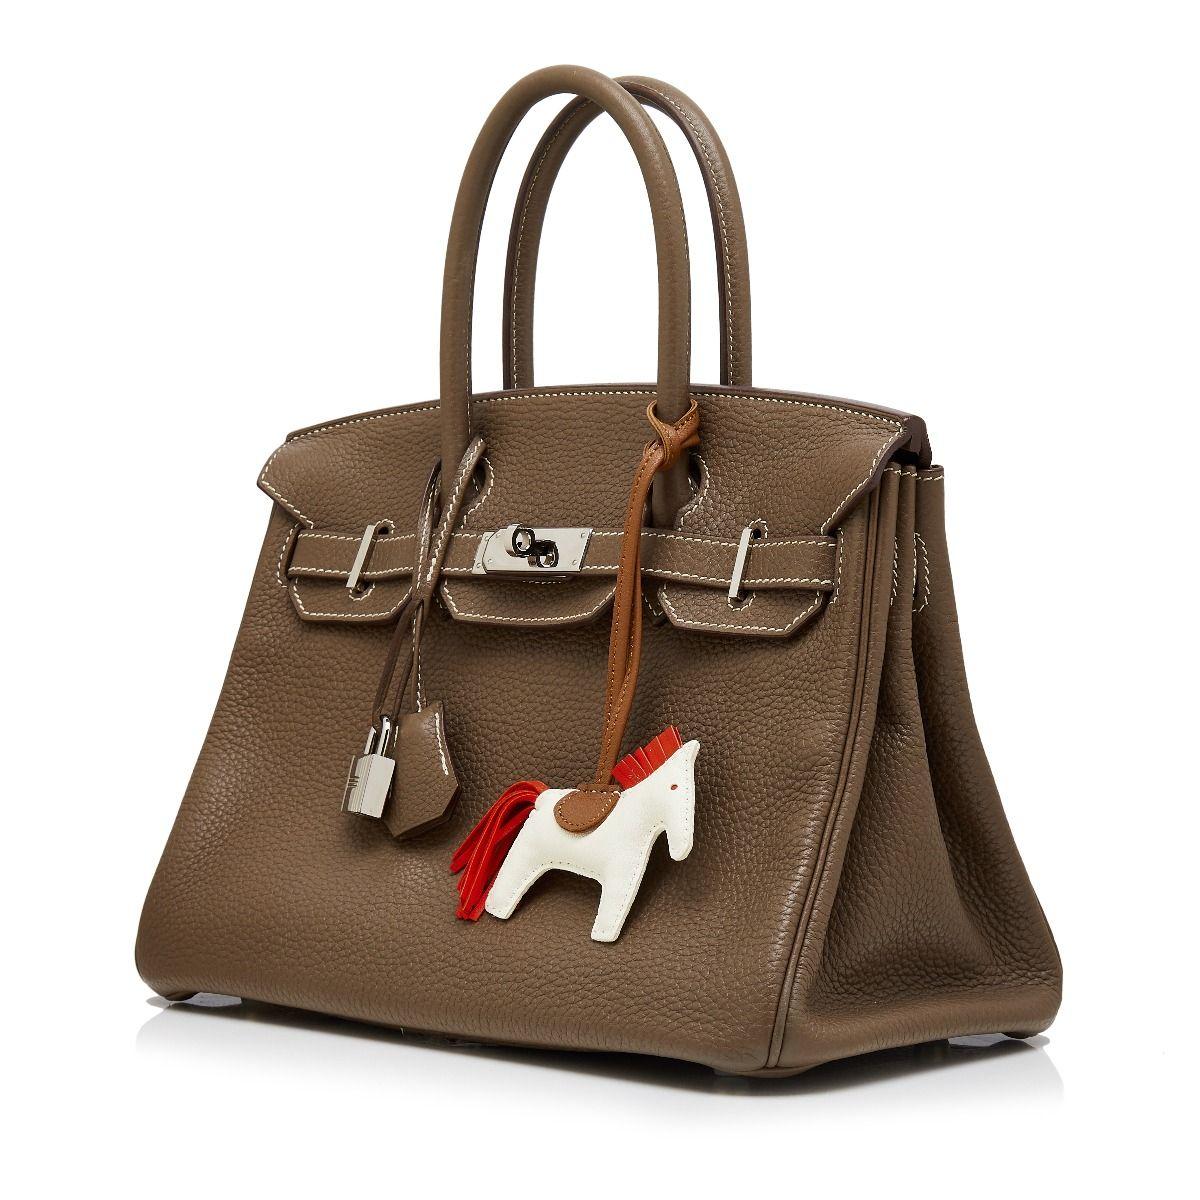 Adding a twist to the traditional Hermès Birkin, this truly spectacular, one-of-a-kind rarity combines a neutral etoupe leather exterior with silver-tone metal accents, for an effect that is unexpectedly modern and fresh. Crafted in France, this